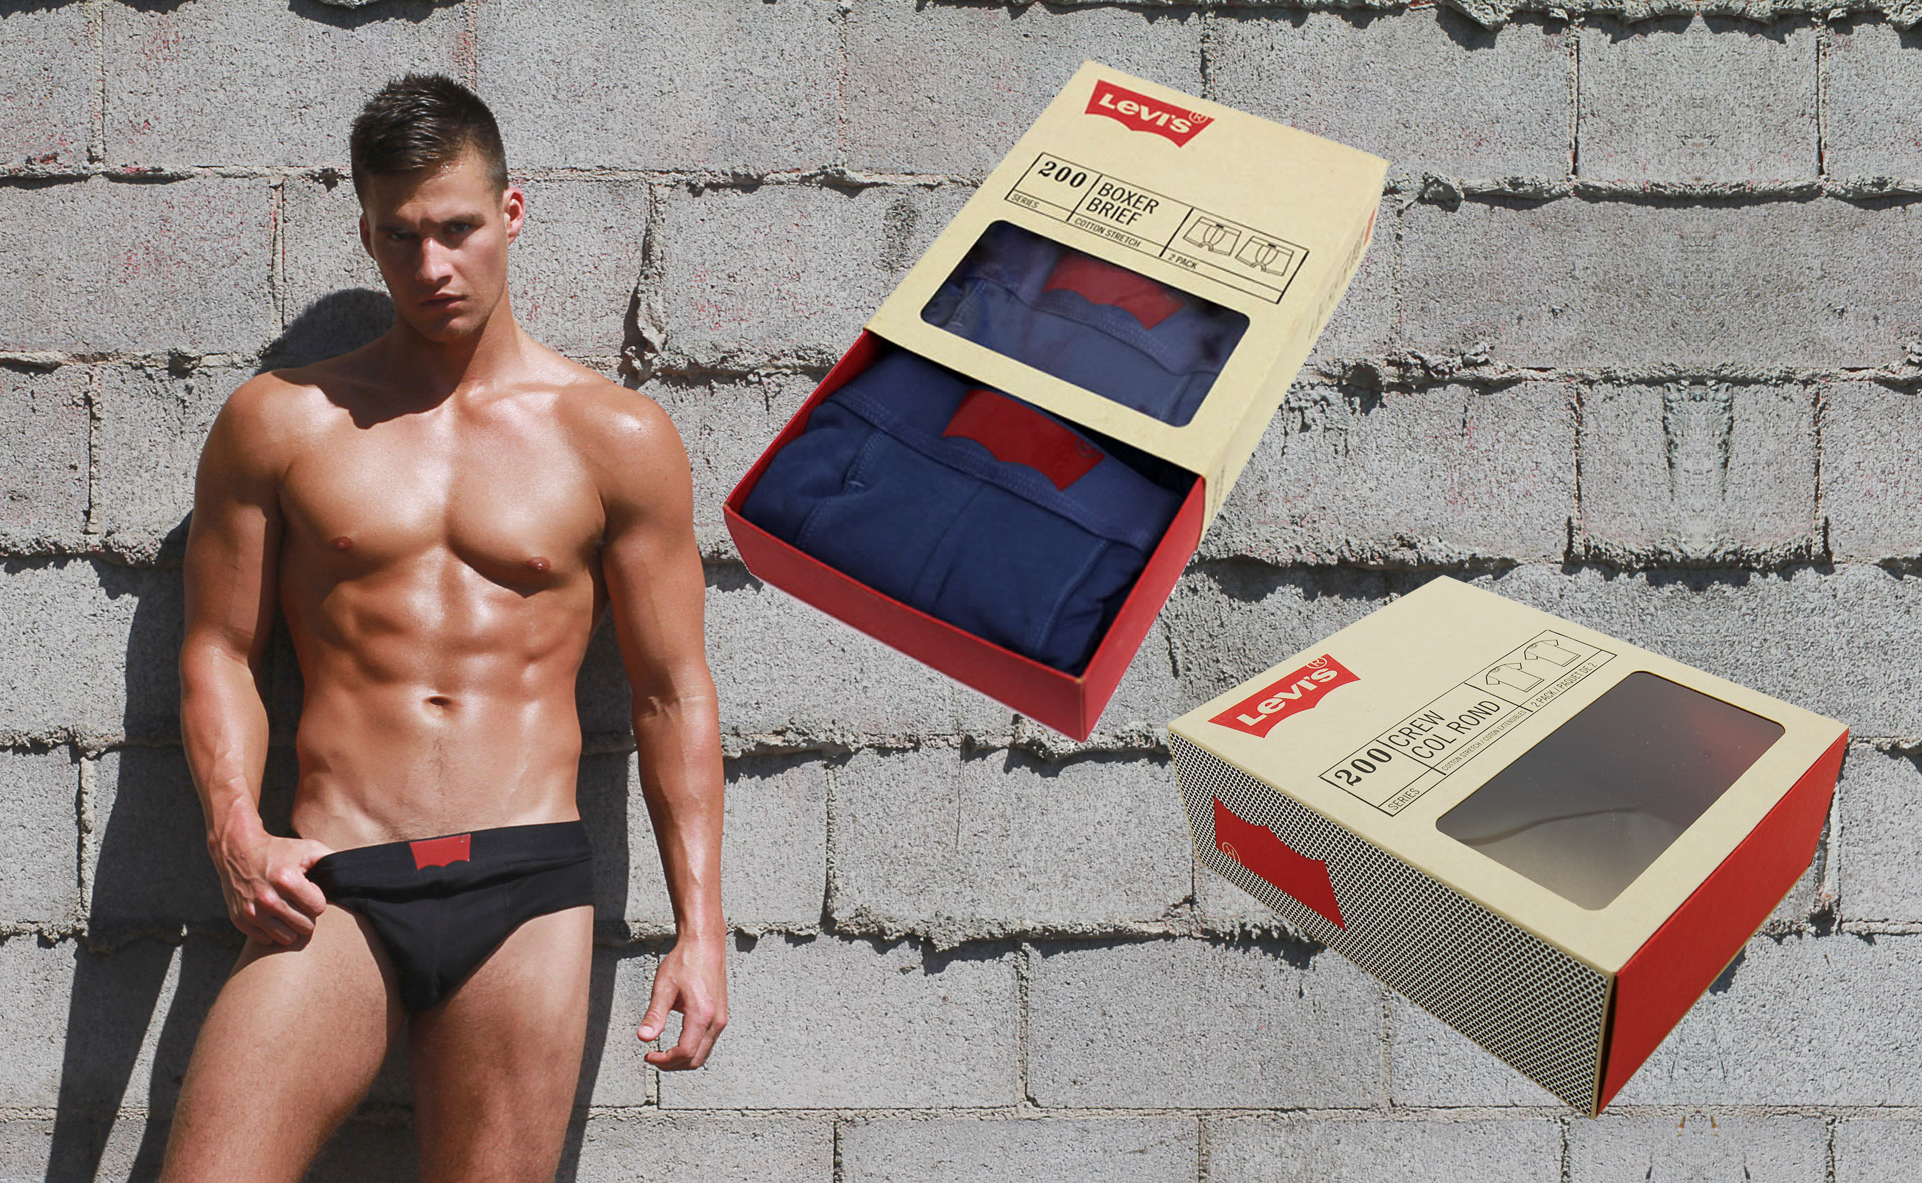 The Hottest Menswear Item- Why Men are Paying More Top Dollar for Underwear